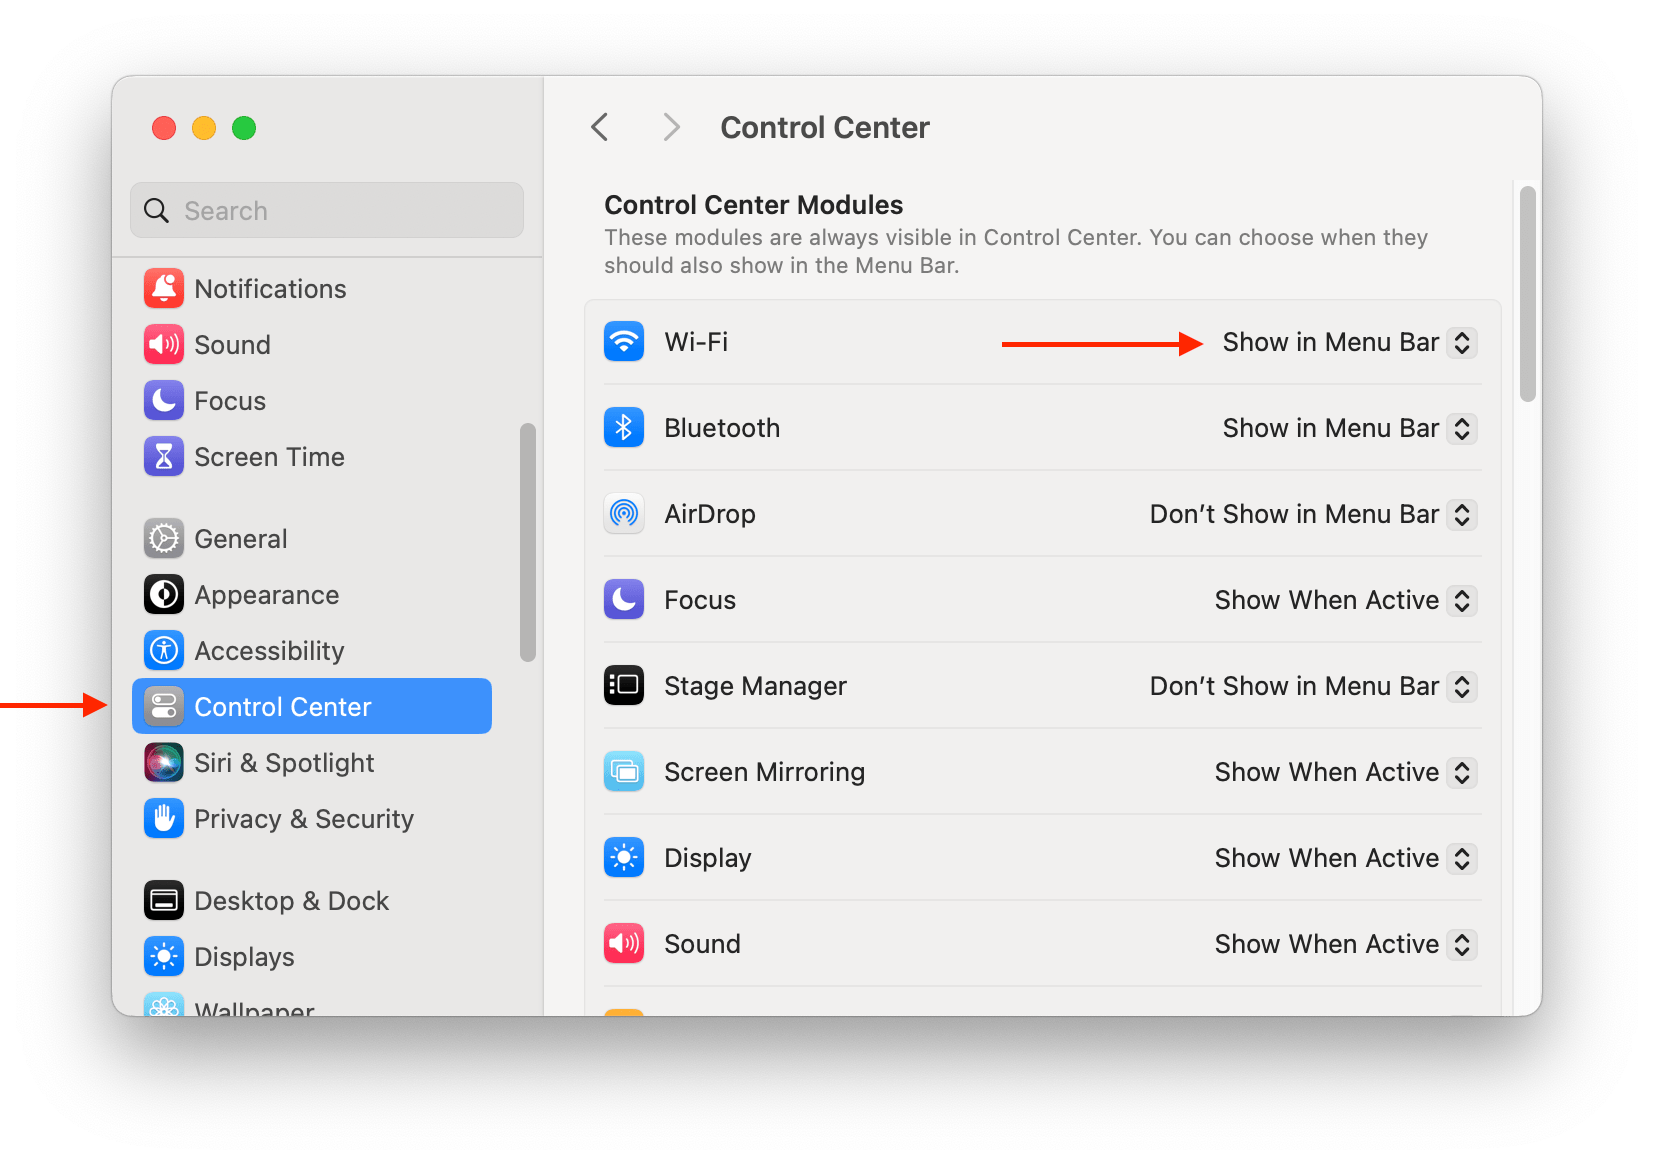 System Settings showing Control Center options